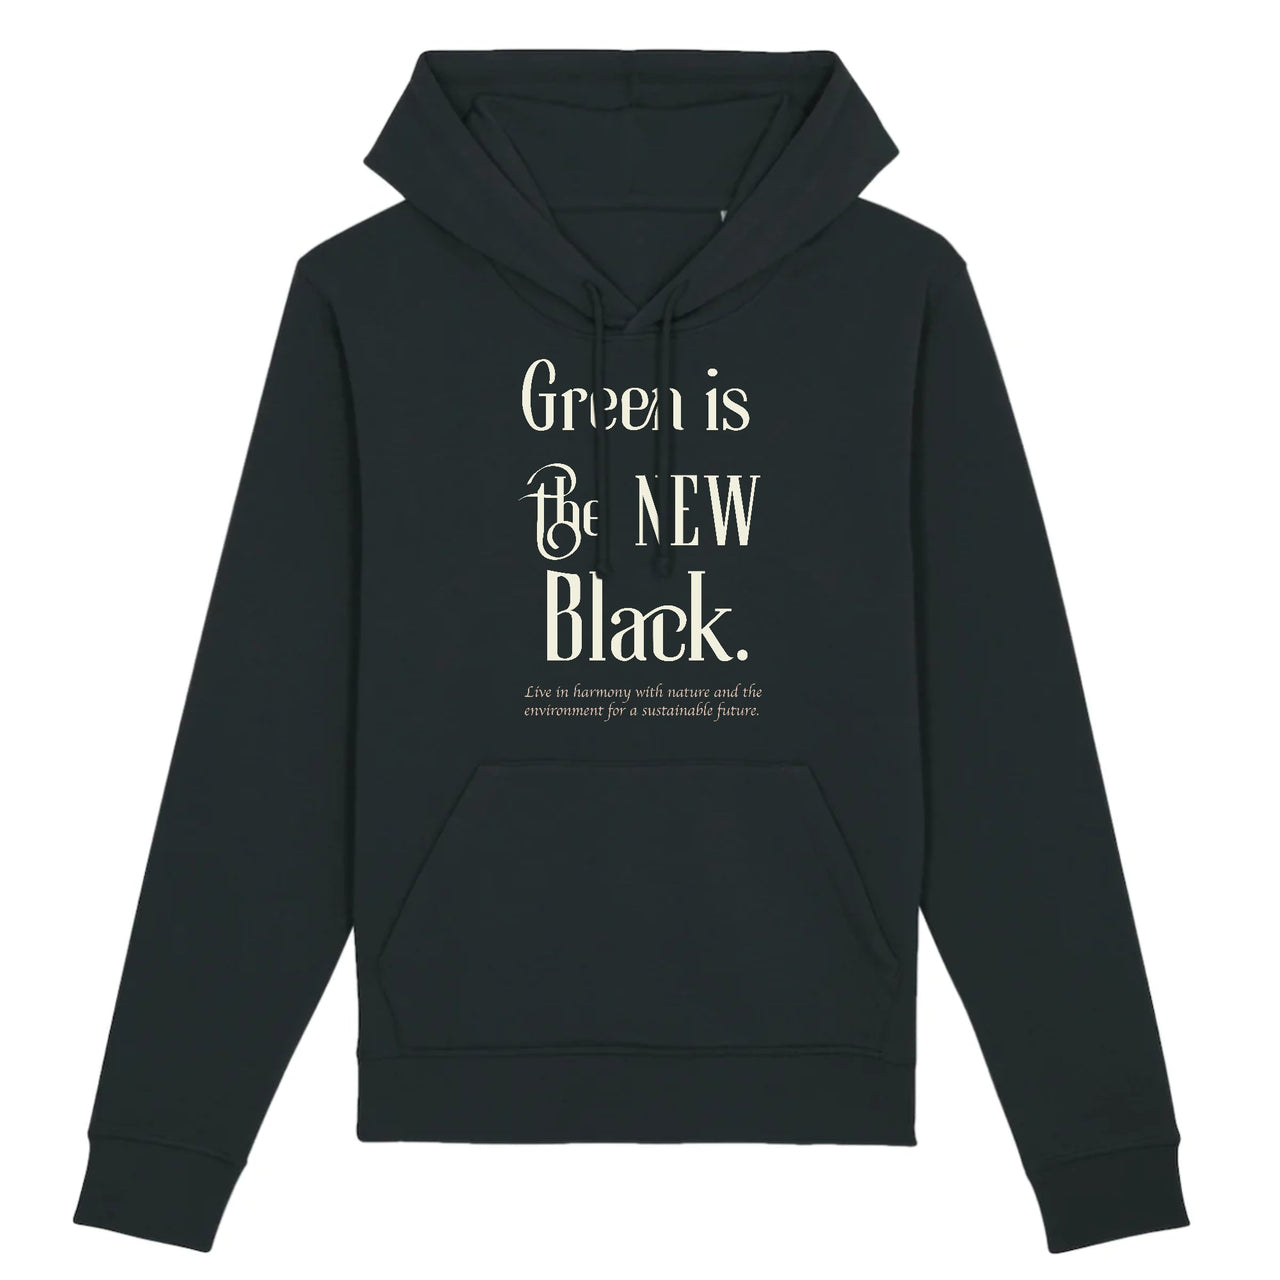 Make a statement with an eco-friendly hoodie that reflects your values.